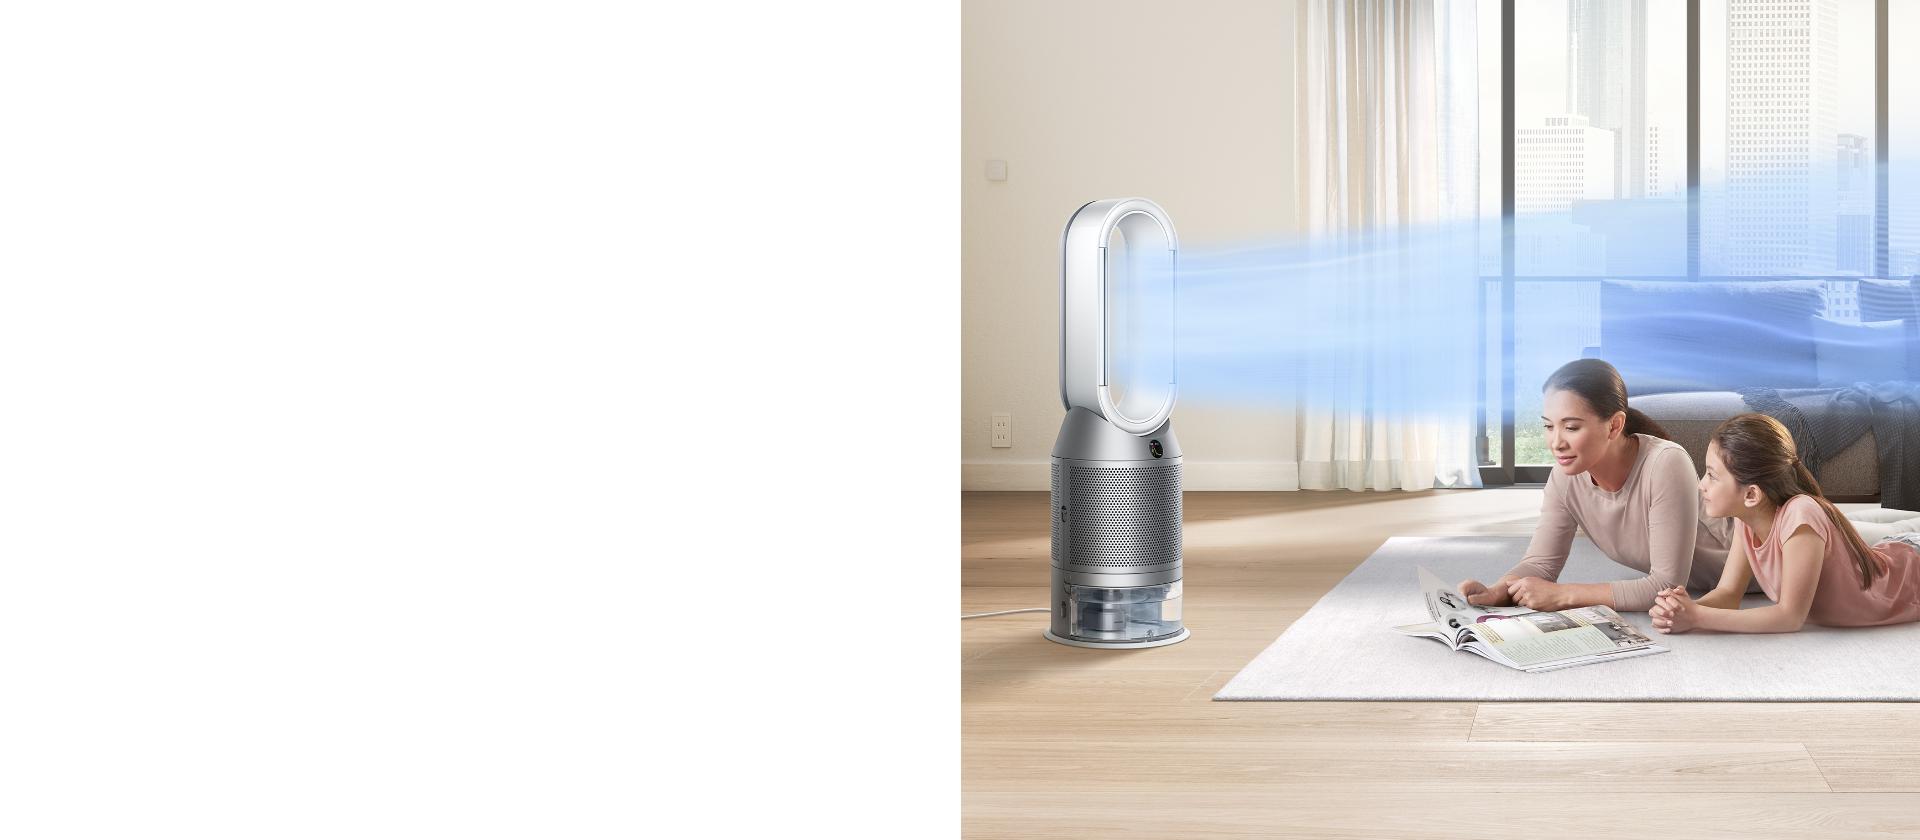 Family room with purifier humidifier projecting airflow